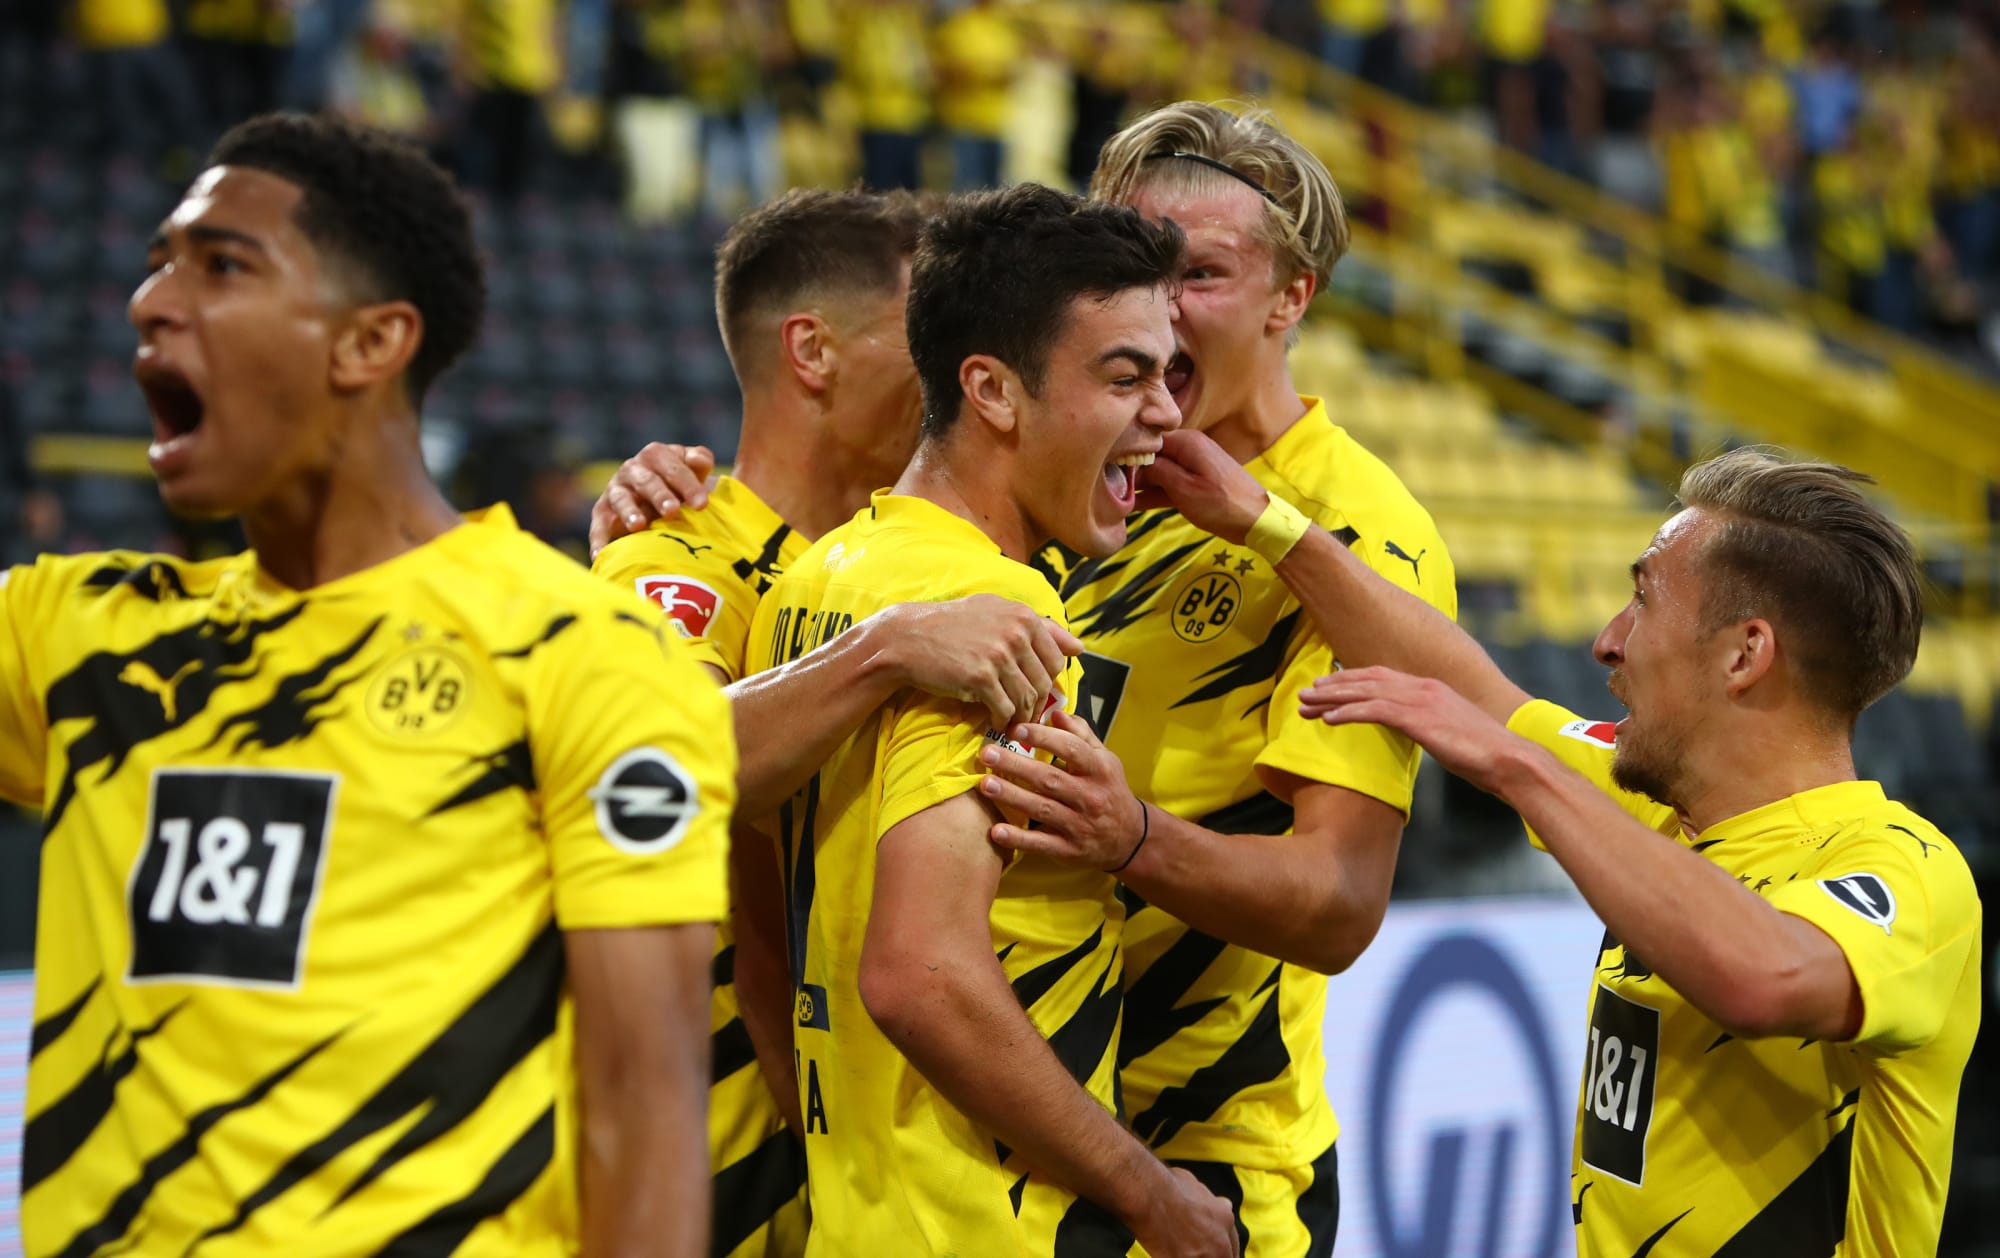 FC Augsburg vs Borussia Dortmund Where the game could be won